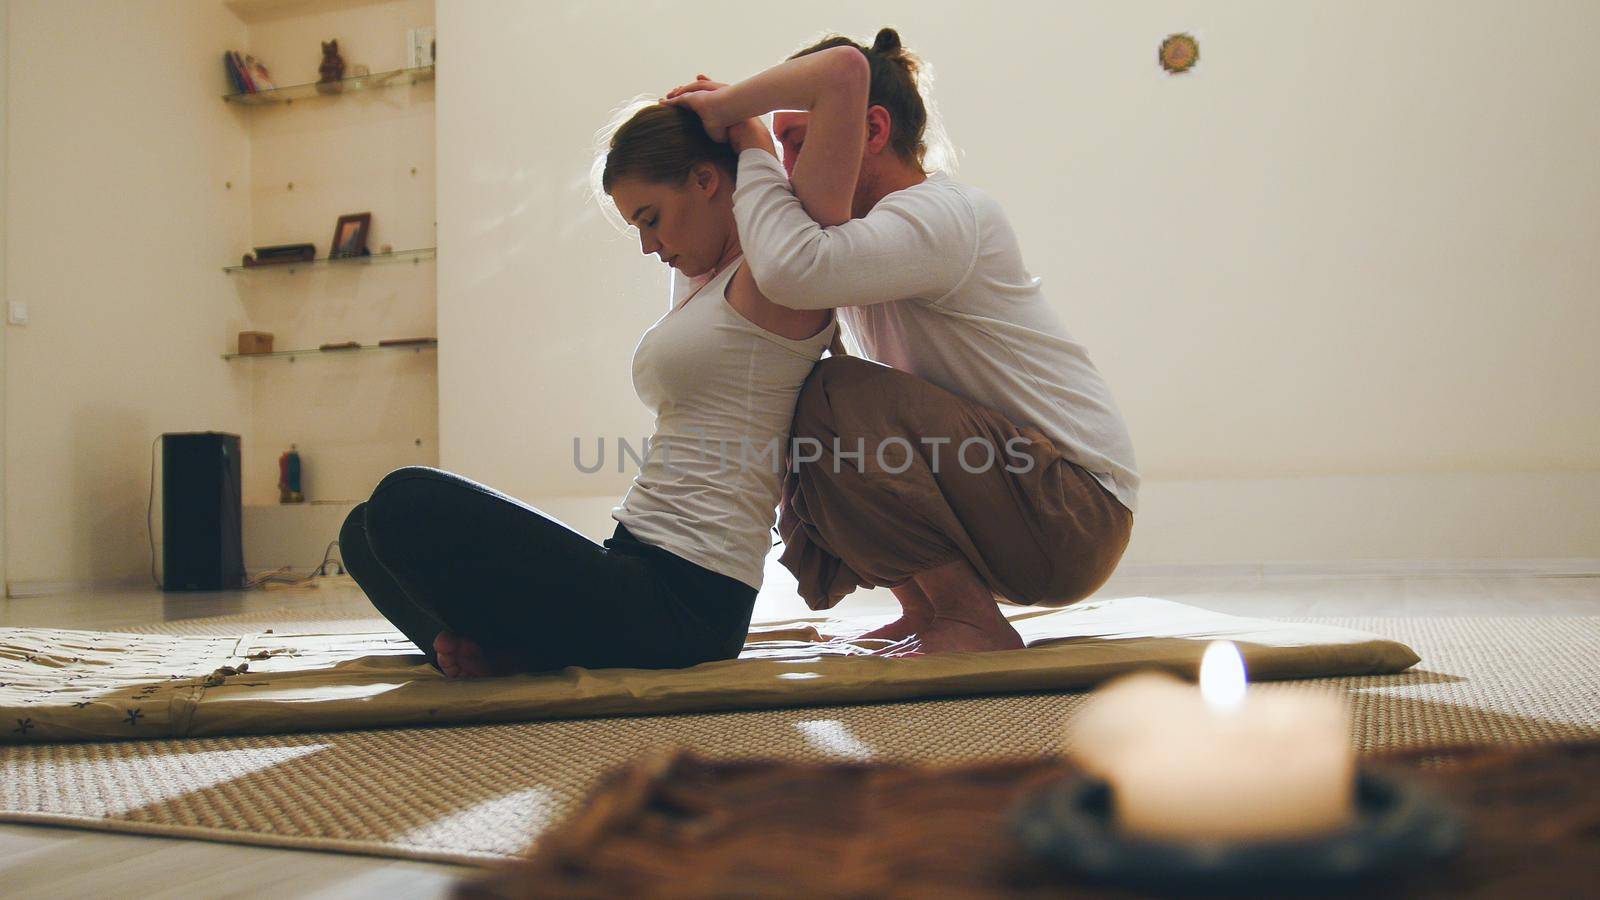 Massage session in candles - traditional thailand therapy for young female model, telephoto